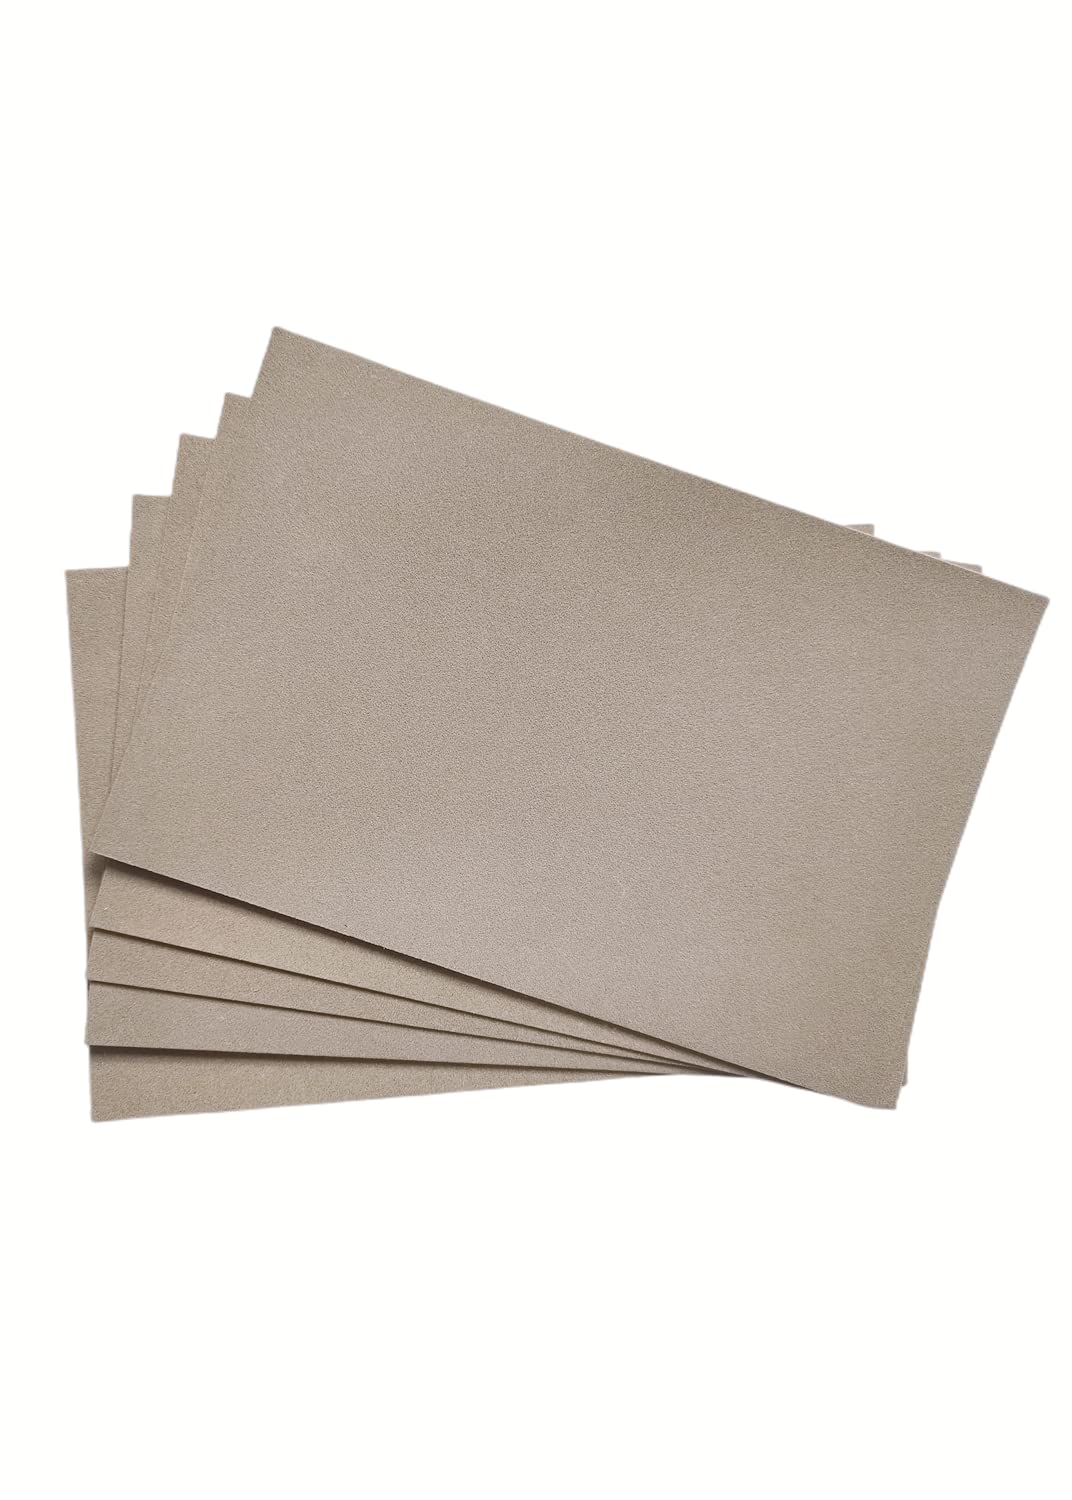 SWR Sanded Pastel Paper 4K Brown Pastel Paper Art Supplies Craft Paper  Thick &Heavy Sand Paper for Pastels Pencils & Charcoal Soft Pastels(5  Sheets Brown 21.49X15.4 in)